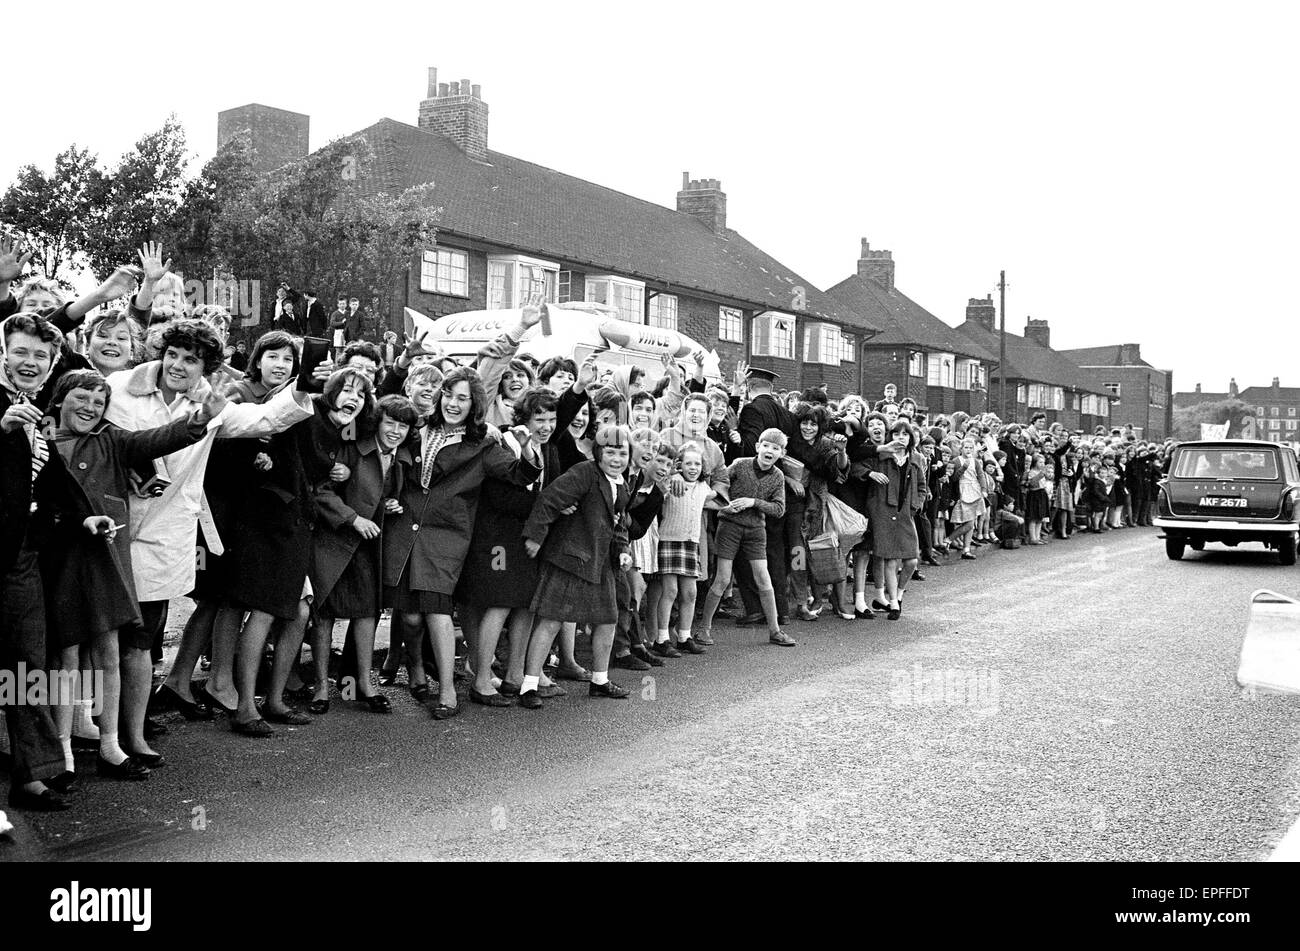 The Beatles in Liverpool for the Premier of a Hard Day's Night. Fans line the streets in hope to catch a glimpse of The Beatles during their trip to Liverpool 10th July 1964. Stock Photo